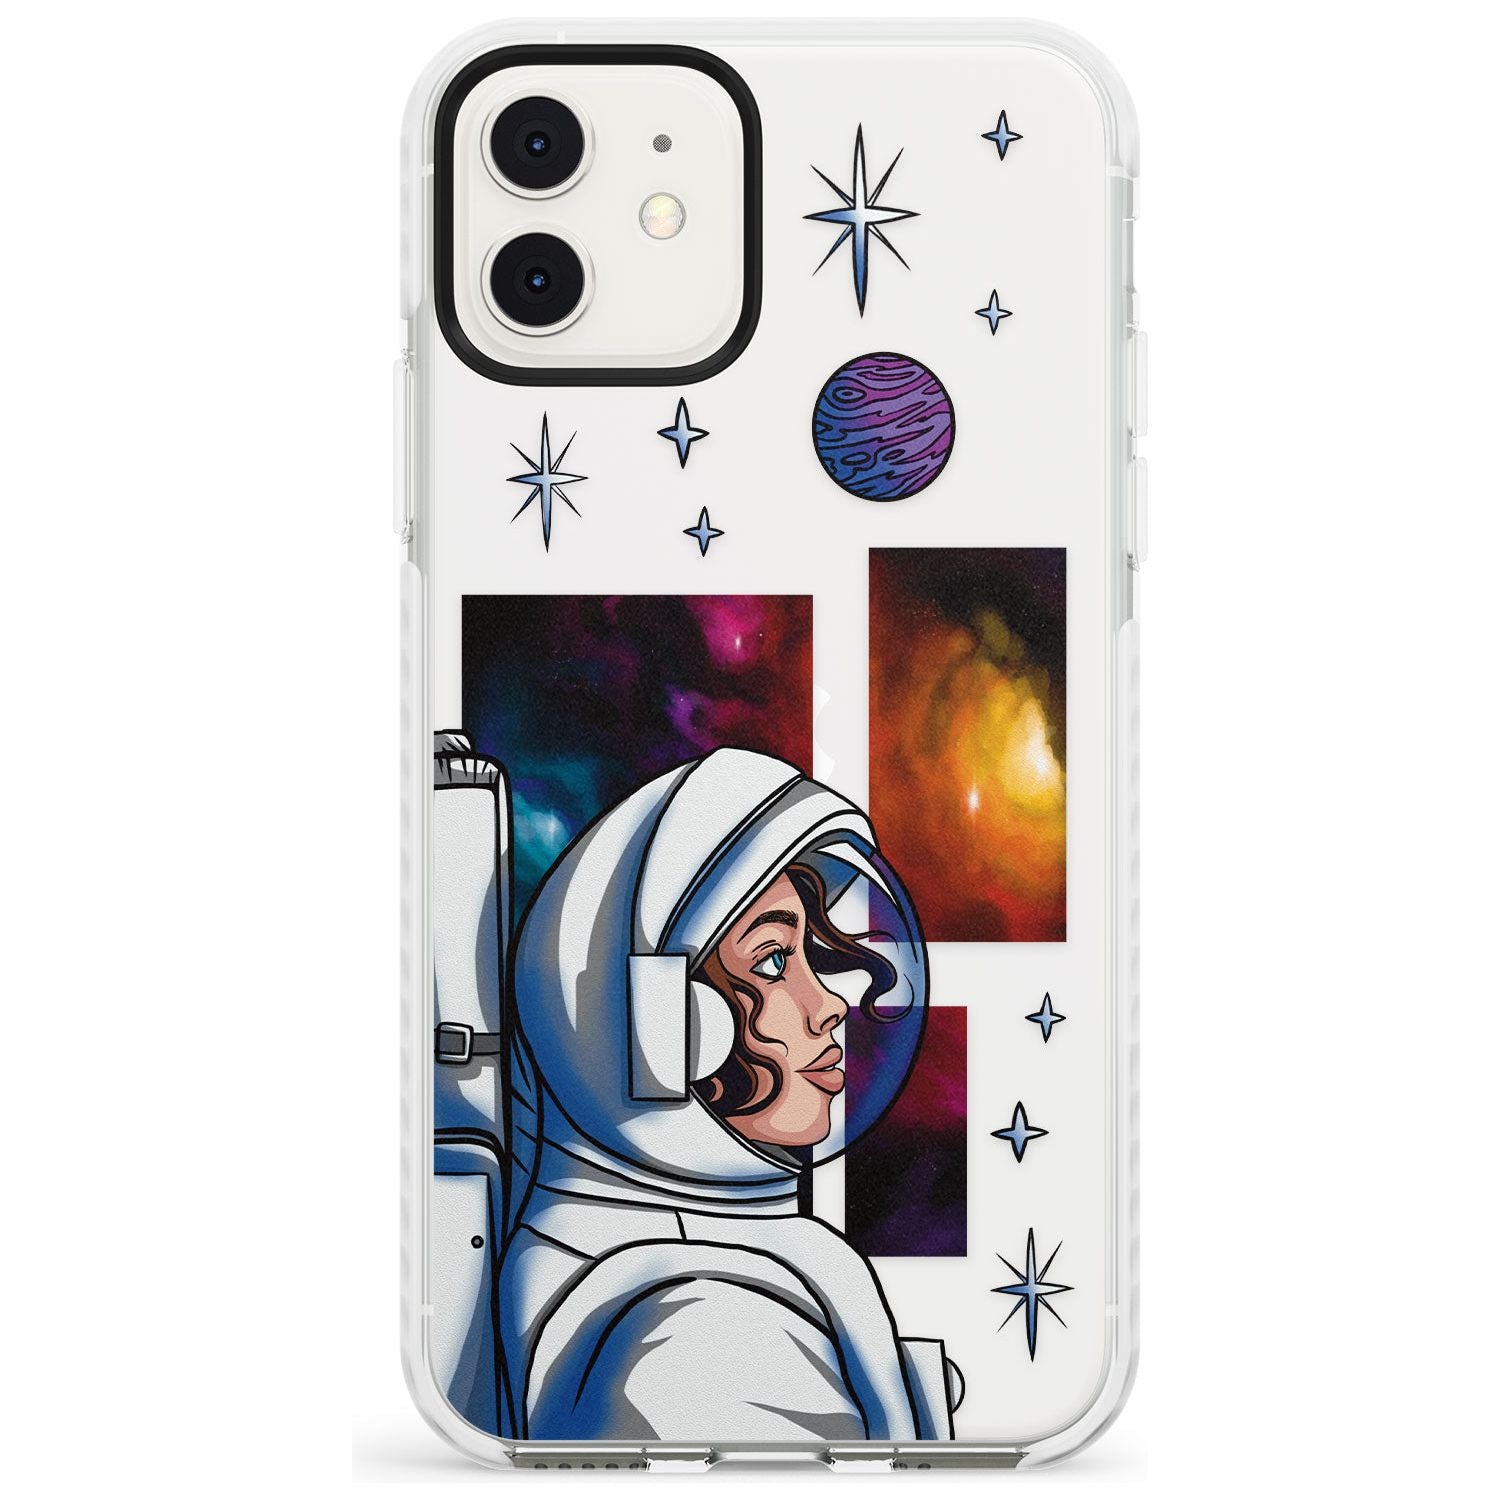 COSMIC AMBITION Slim TPU Phone Case for iPhone 11